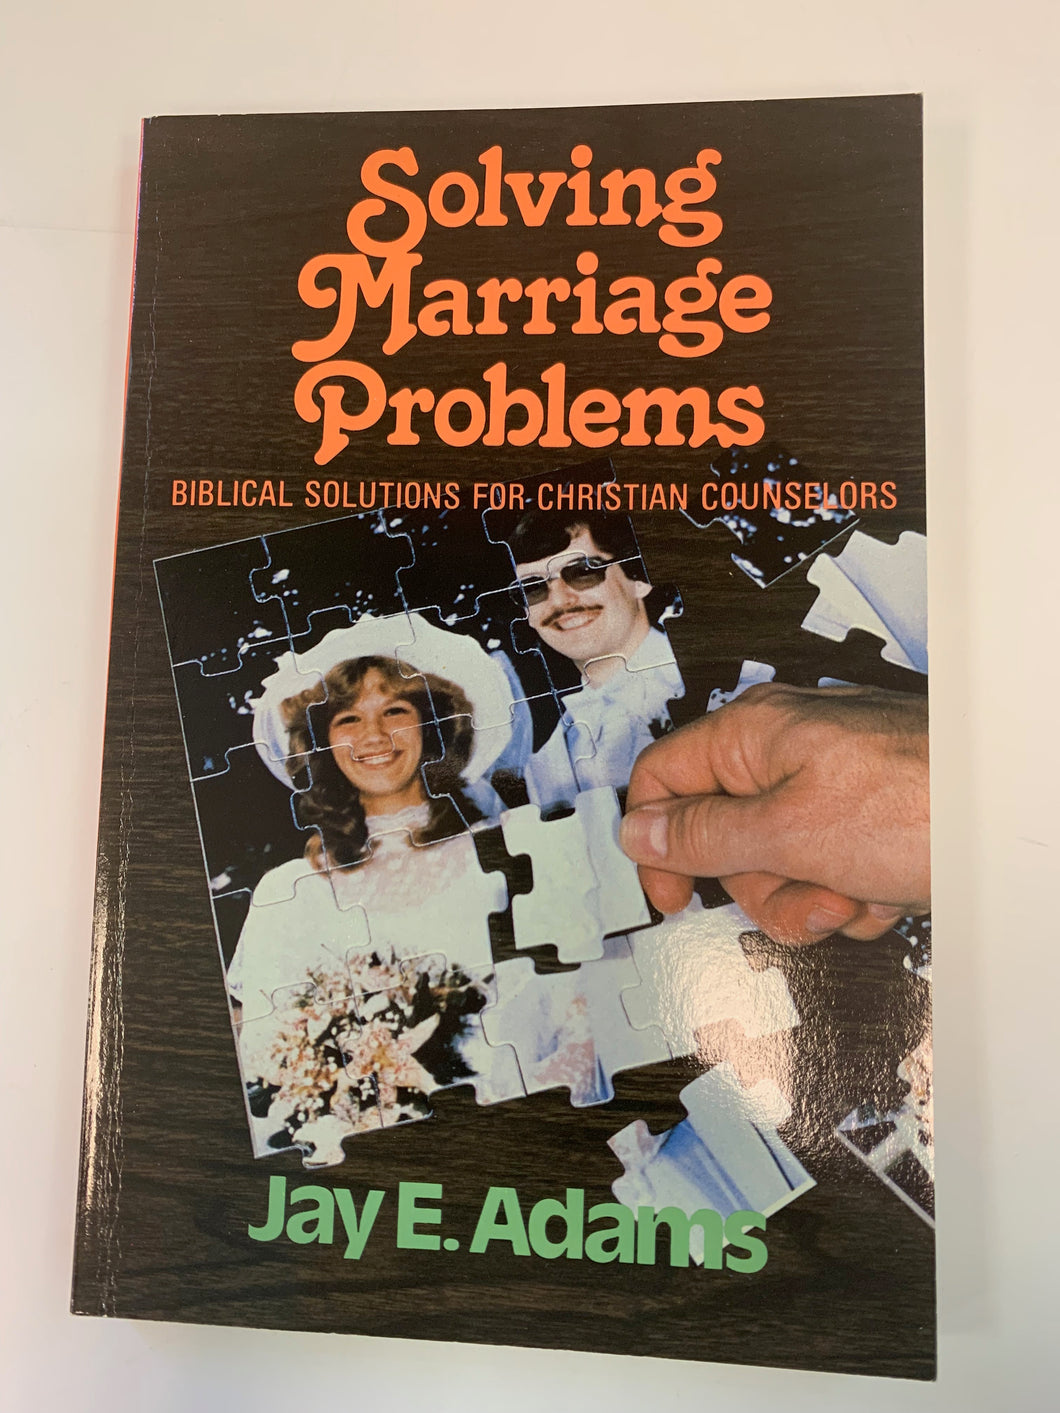 Solving Marriage Problems: Biblical Solutions for Christian Counselors by Jay A. Adams